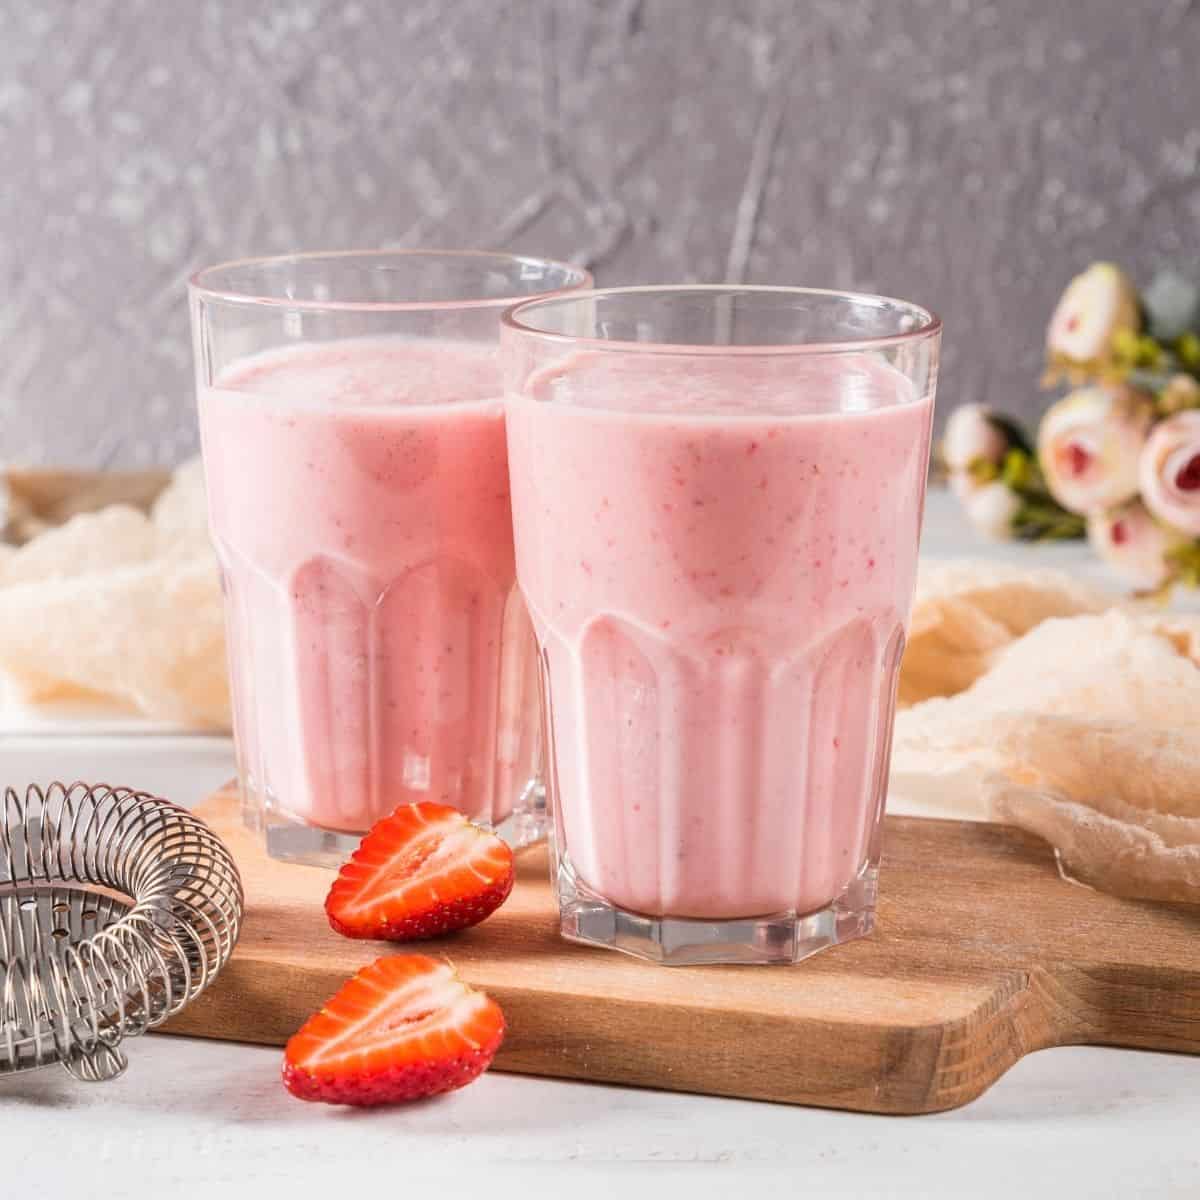 Strawberry Smoothie Recipe (Without Bananas!)